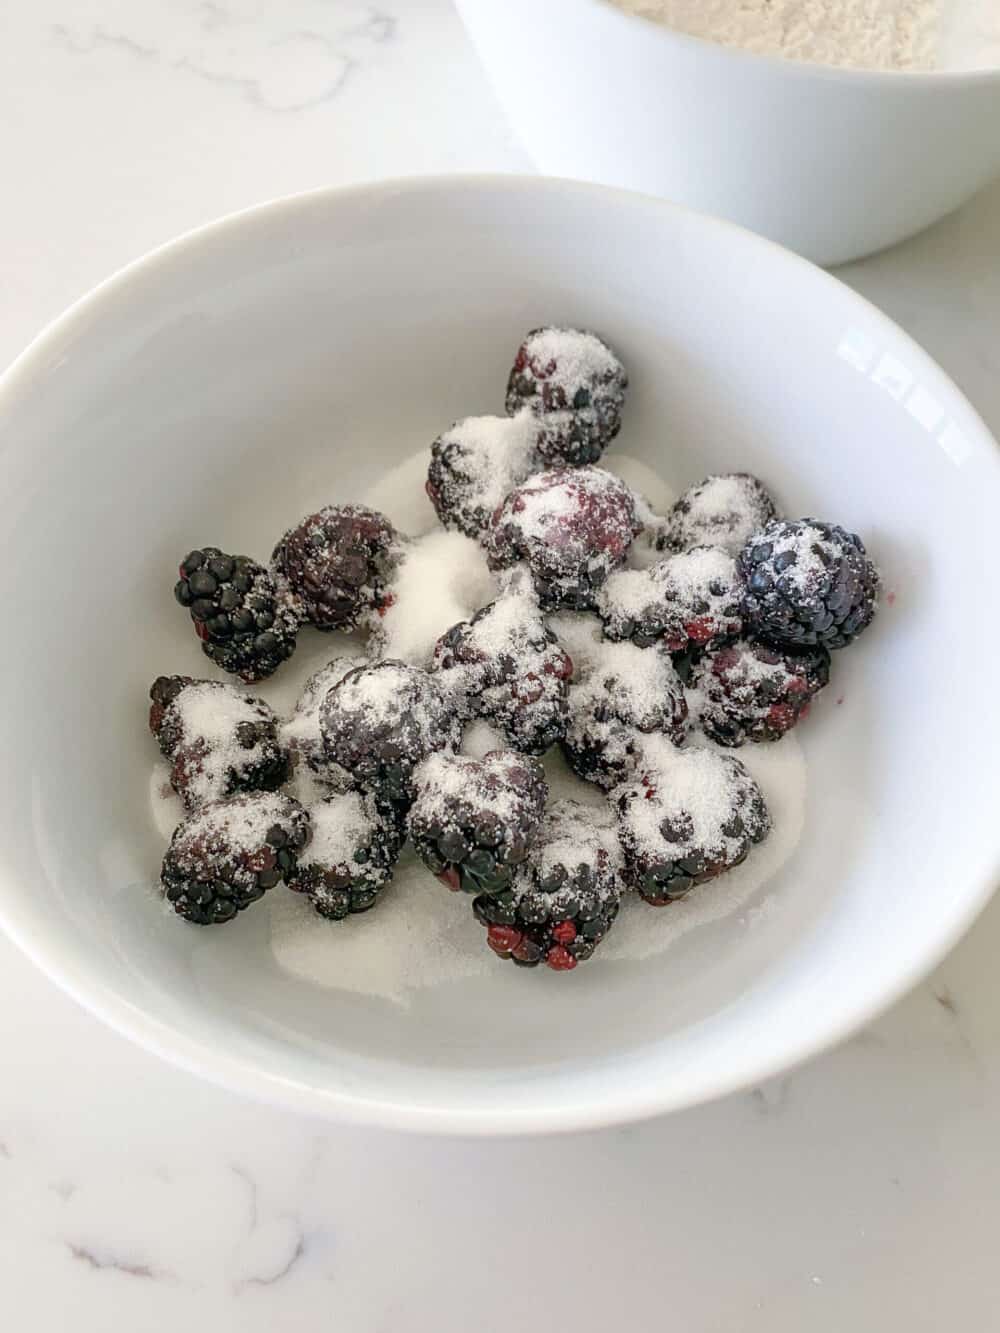 Sugar-Coated Blackberries in a Small White Bowl